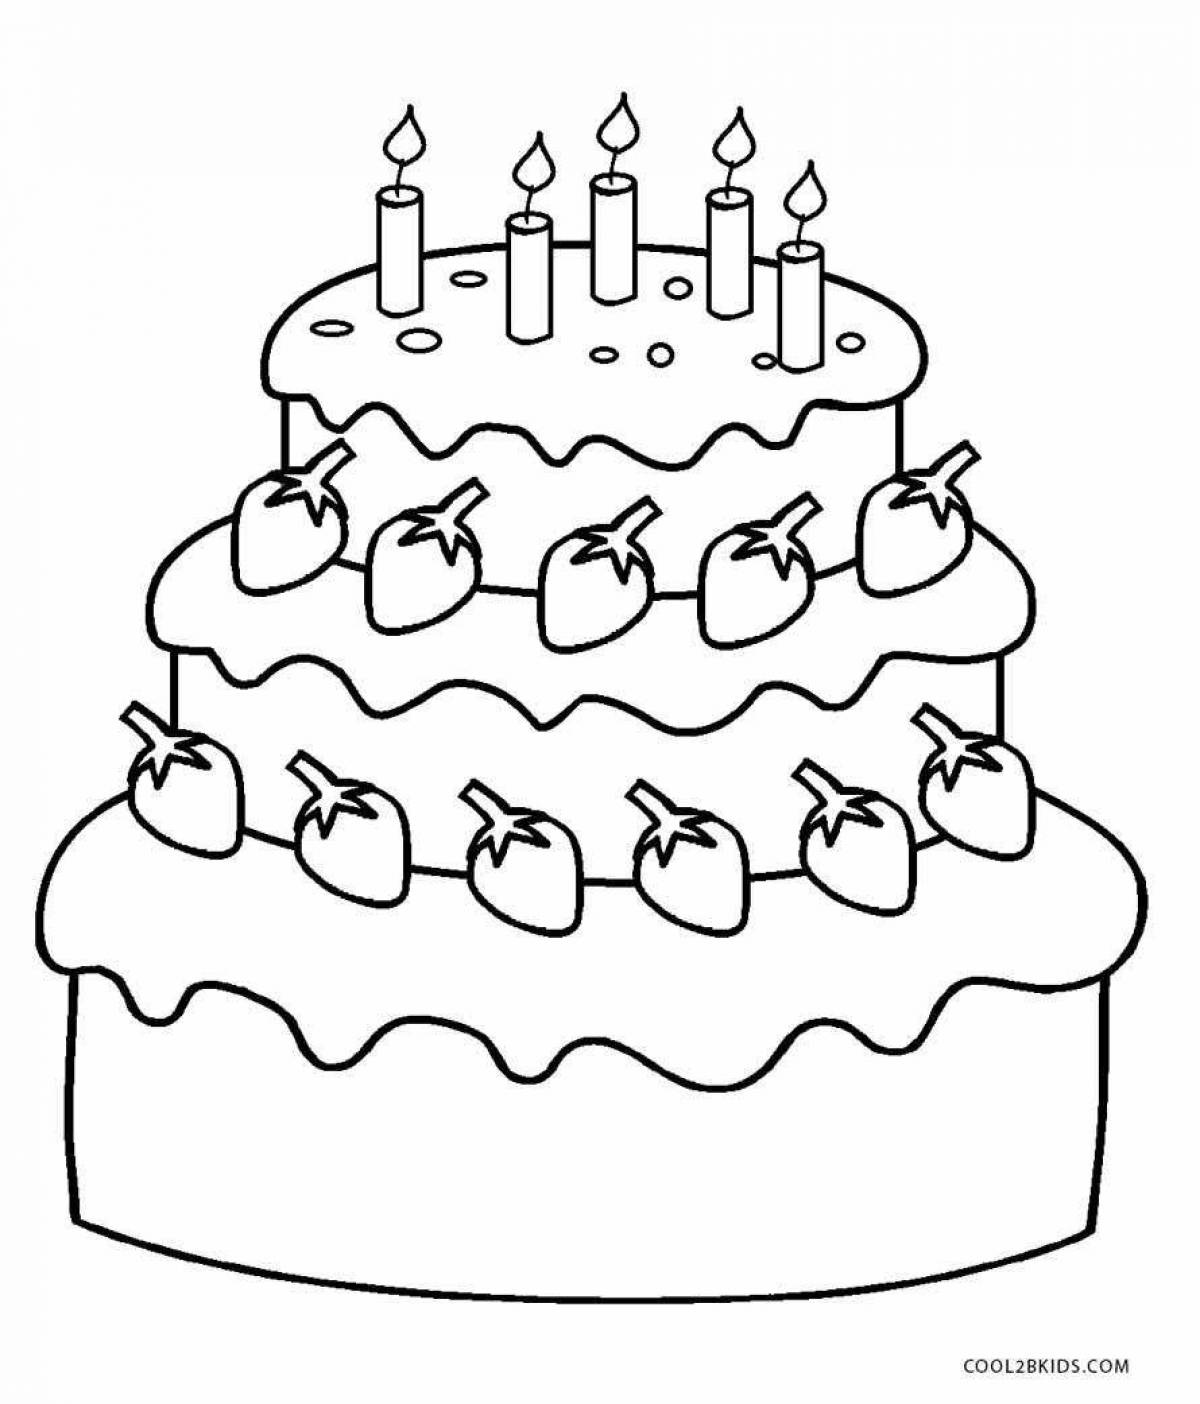 Coloring page lovely birthday cake